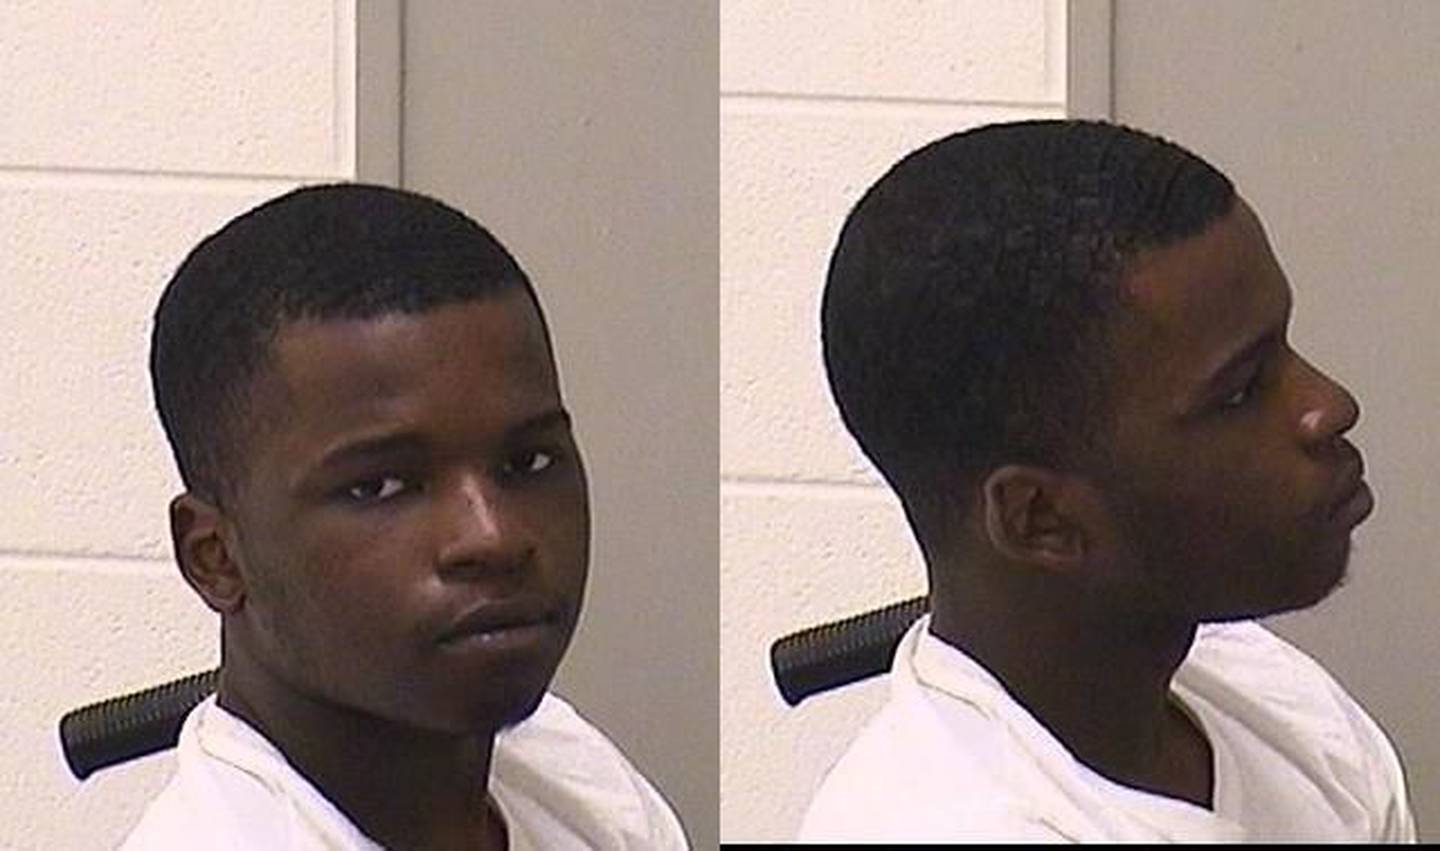 Trevon D. Morris of Elgin is facing several felony charges in the April 20 DUI crash that killed two Judson University students.